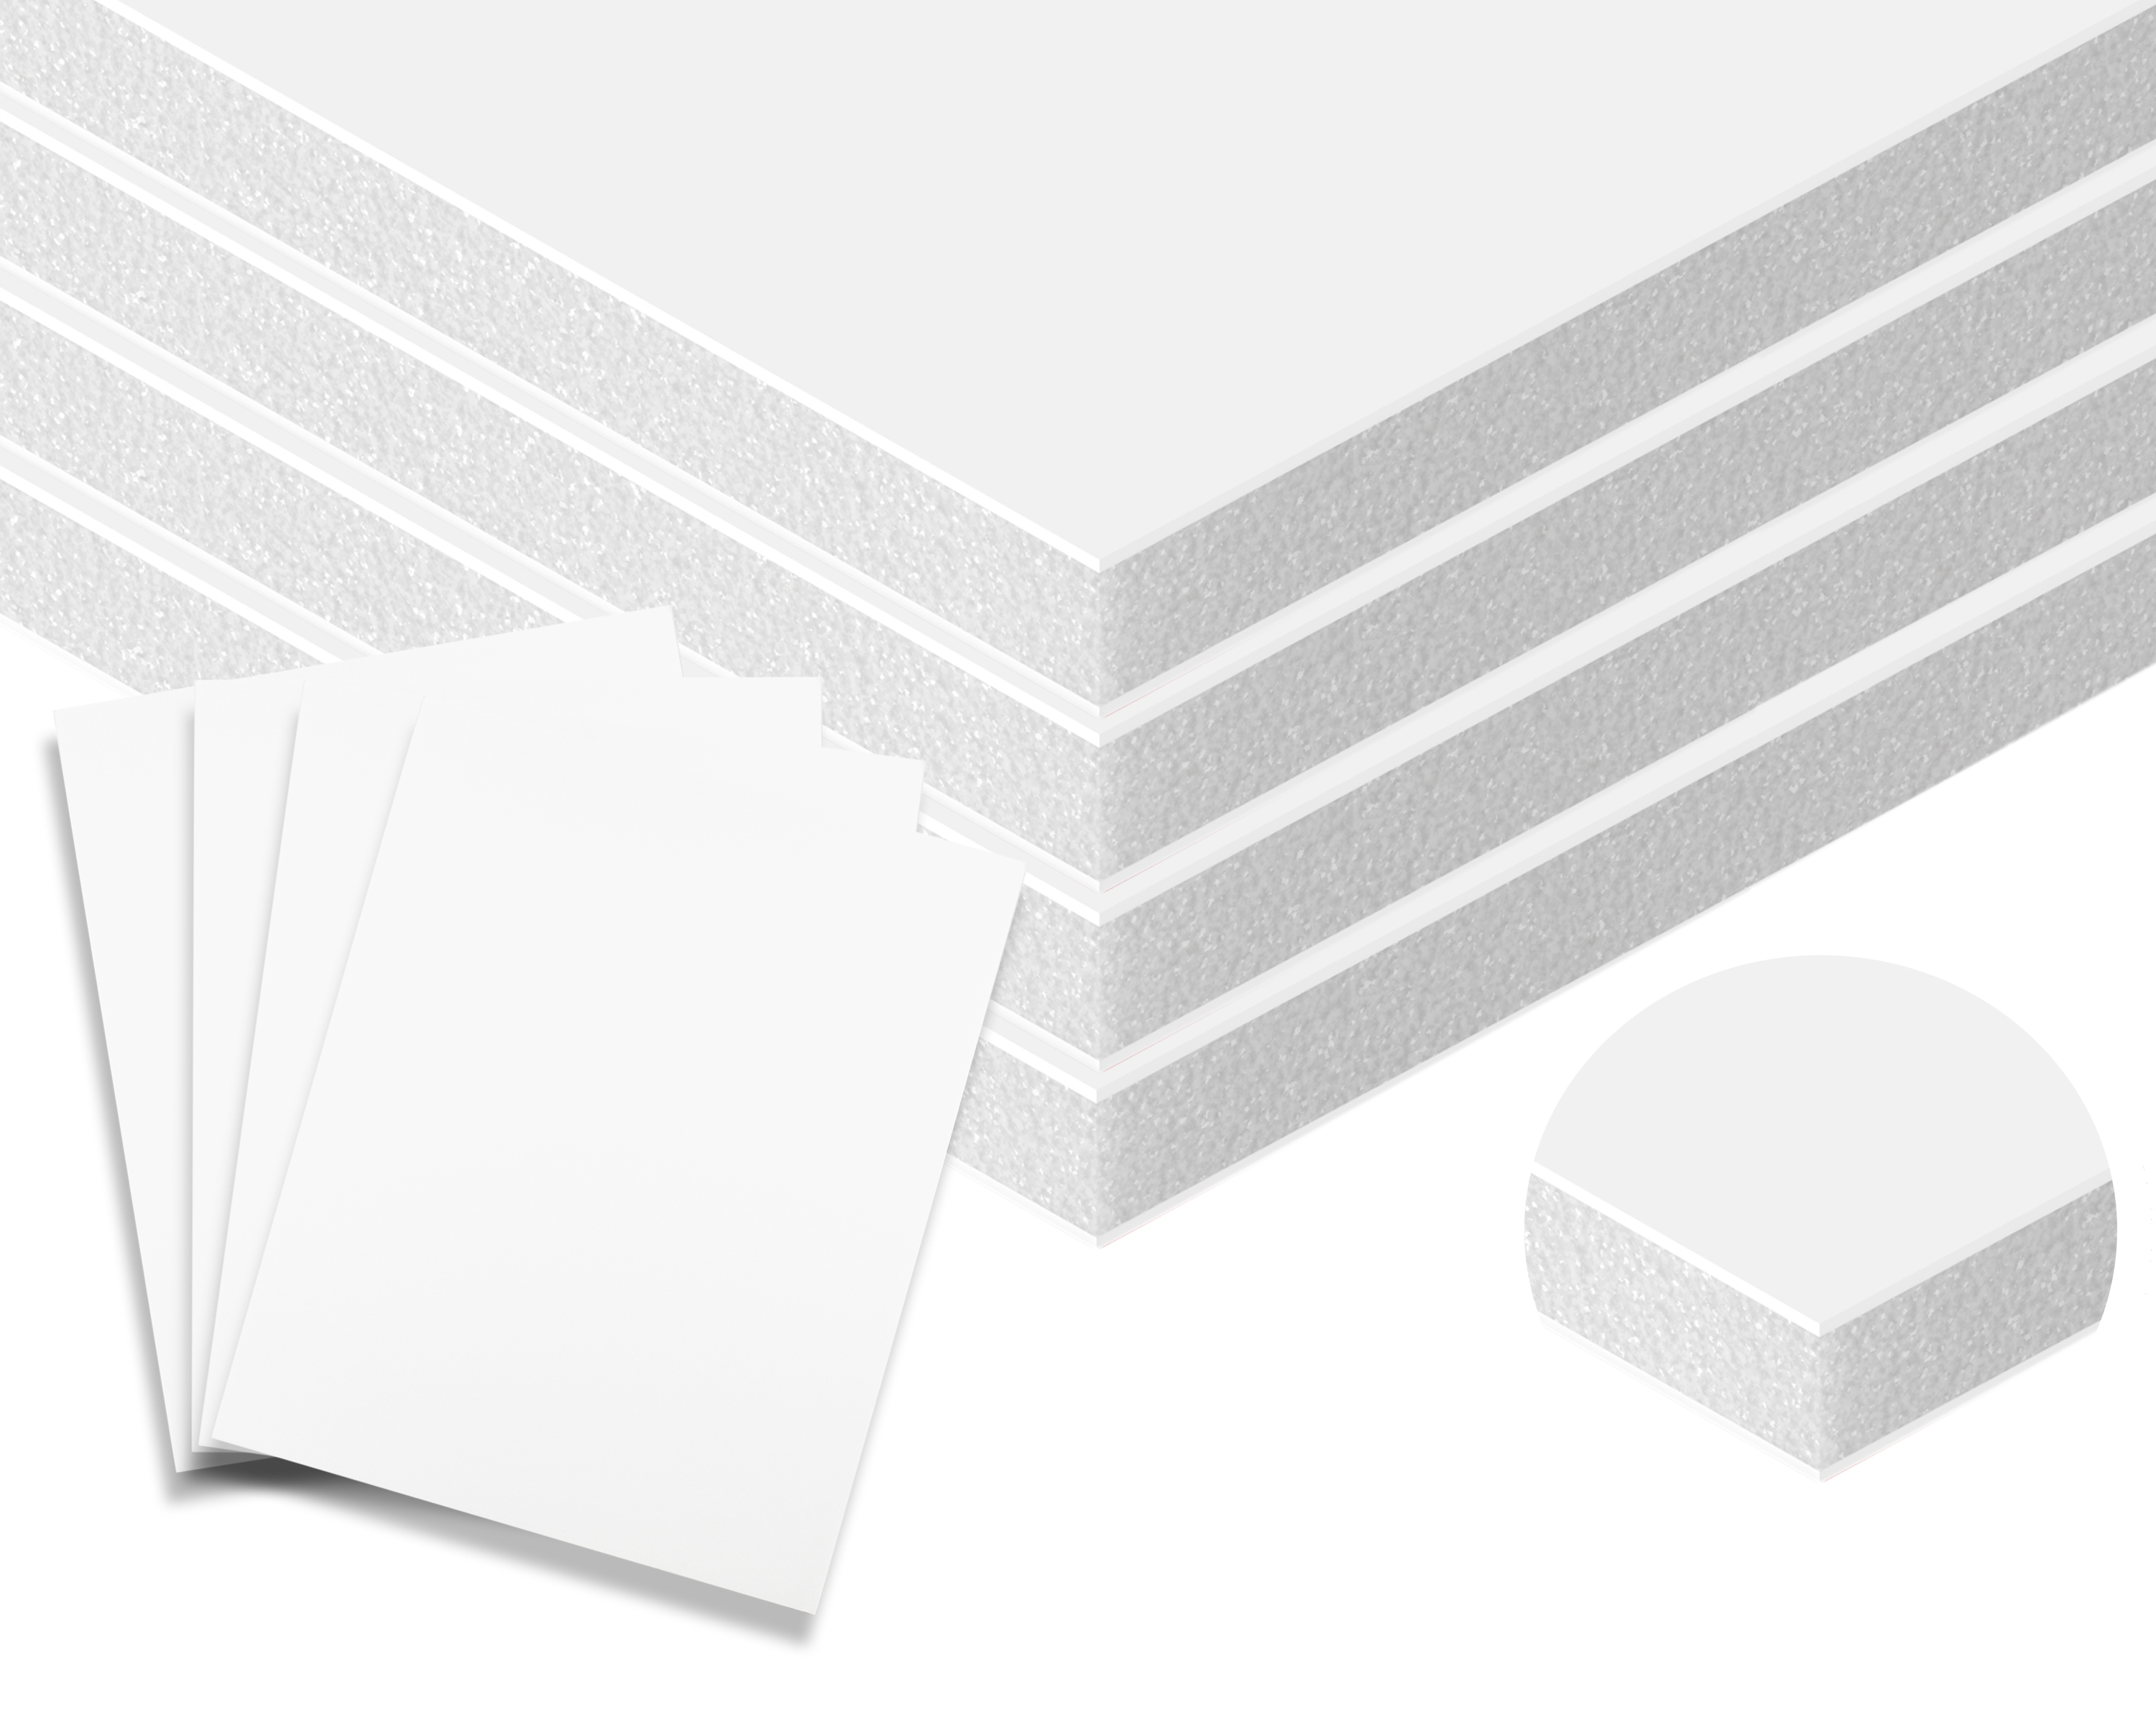 Foam Core Backing Board 3/16 White 8x10- 25 Pack. Many Sizes Available.  Acid Free Buffered Craft Poster Board for Signs, Presentations, School